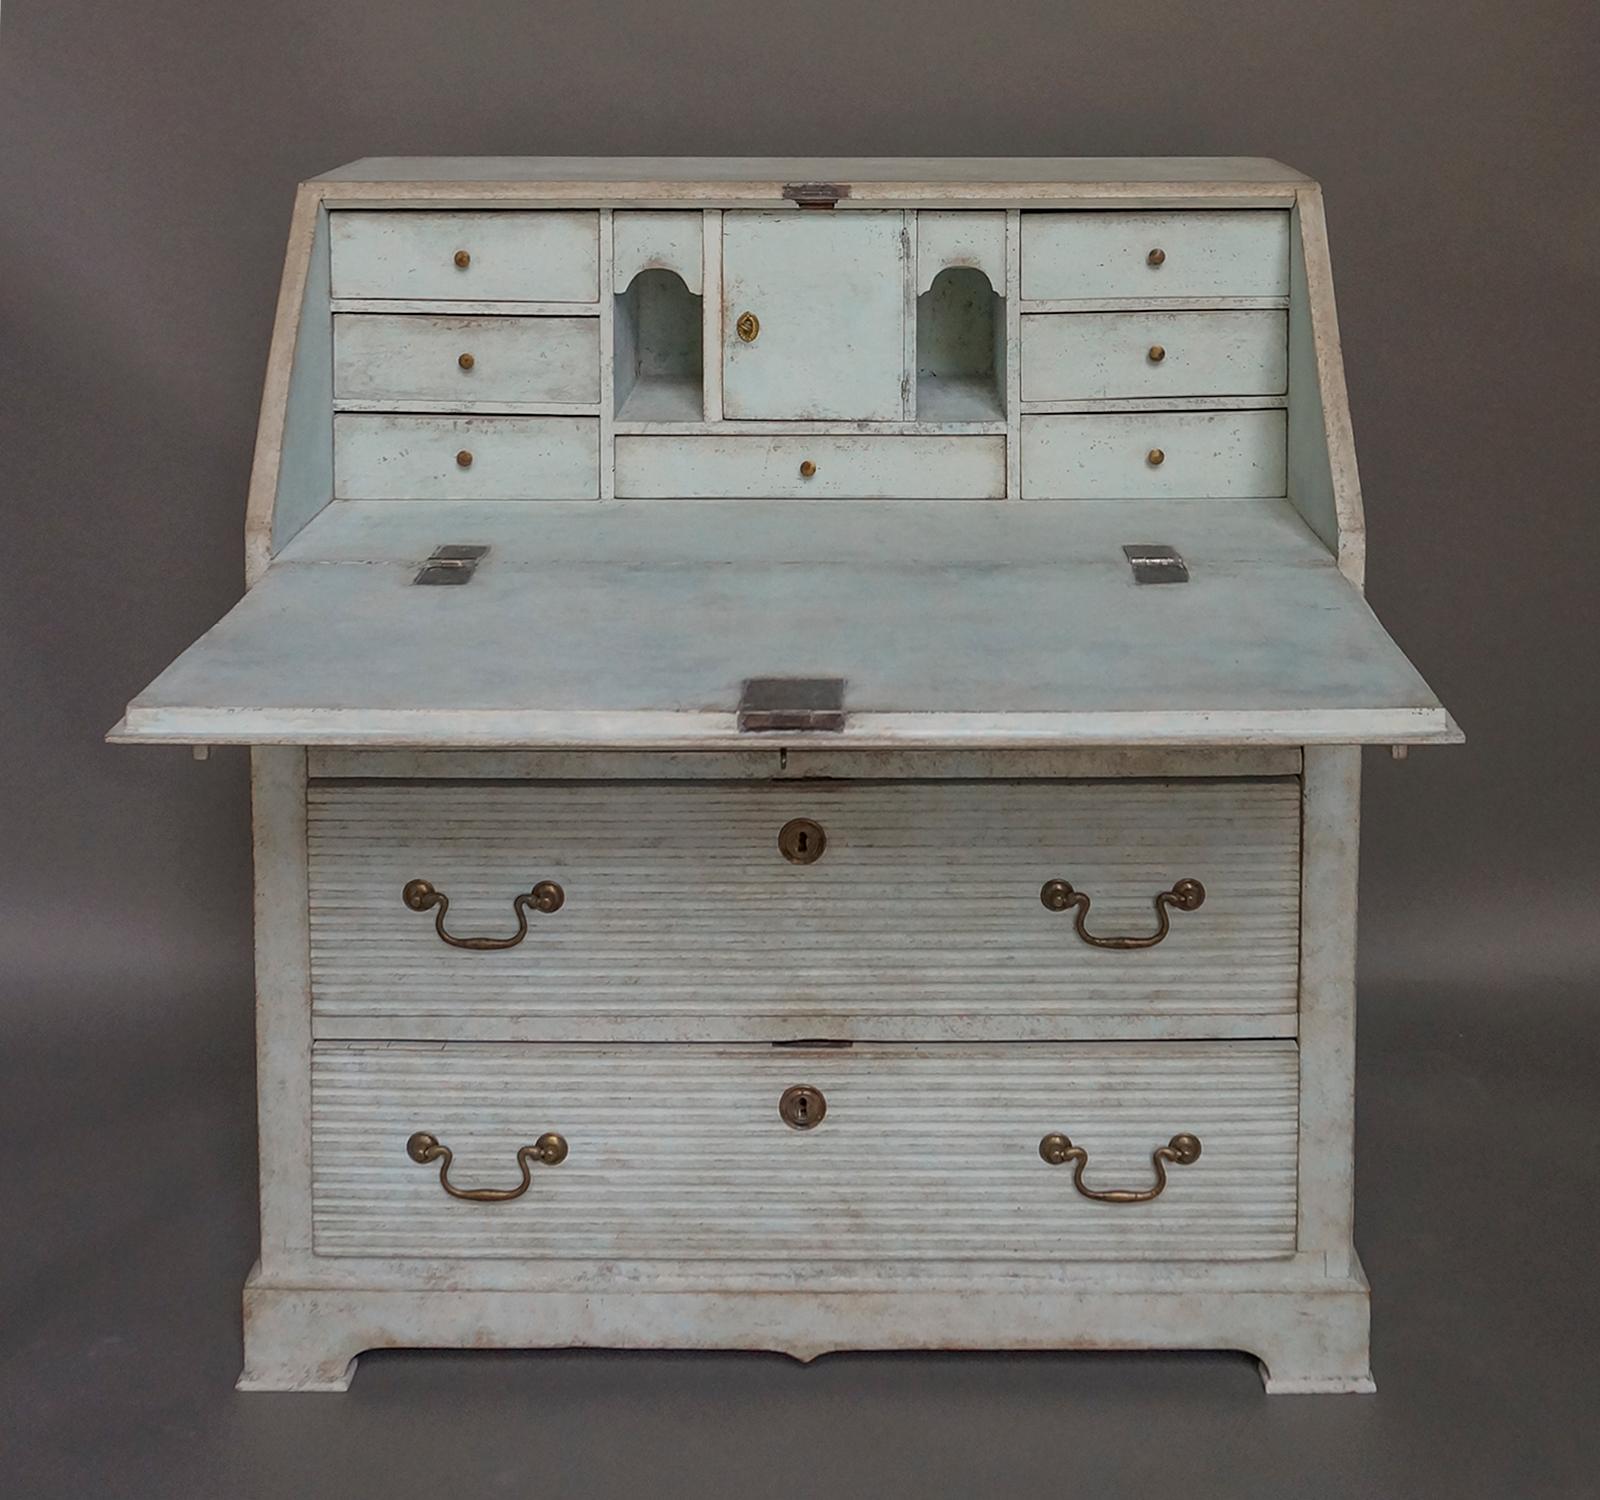 Late Gustavian slant-front writing desk, Sweden circa 1820.  The fitted interior in pale blue paint has a locking compartment and disguised drawers.  Below are three full-width reeded drawers.  The piece sits on a bracket base with exaggerated pad